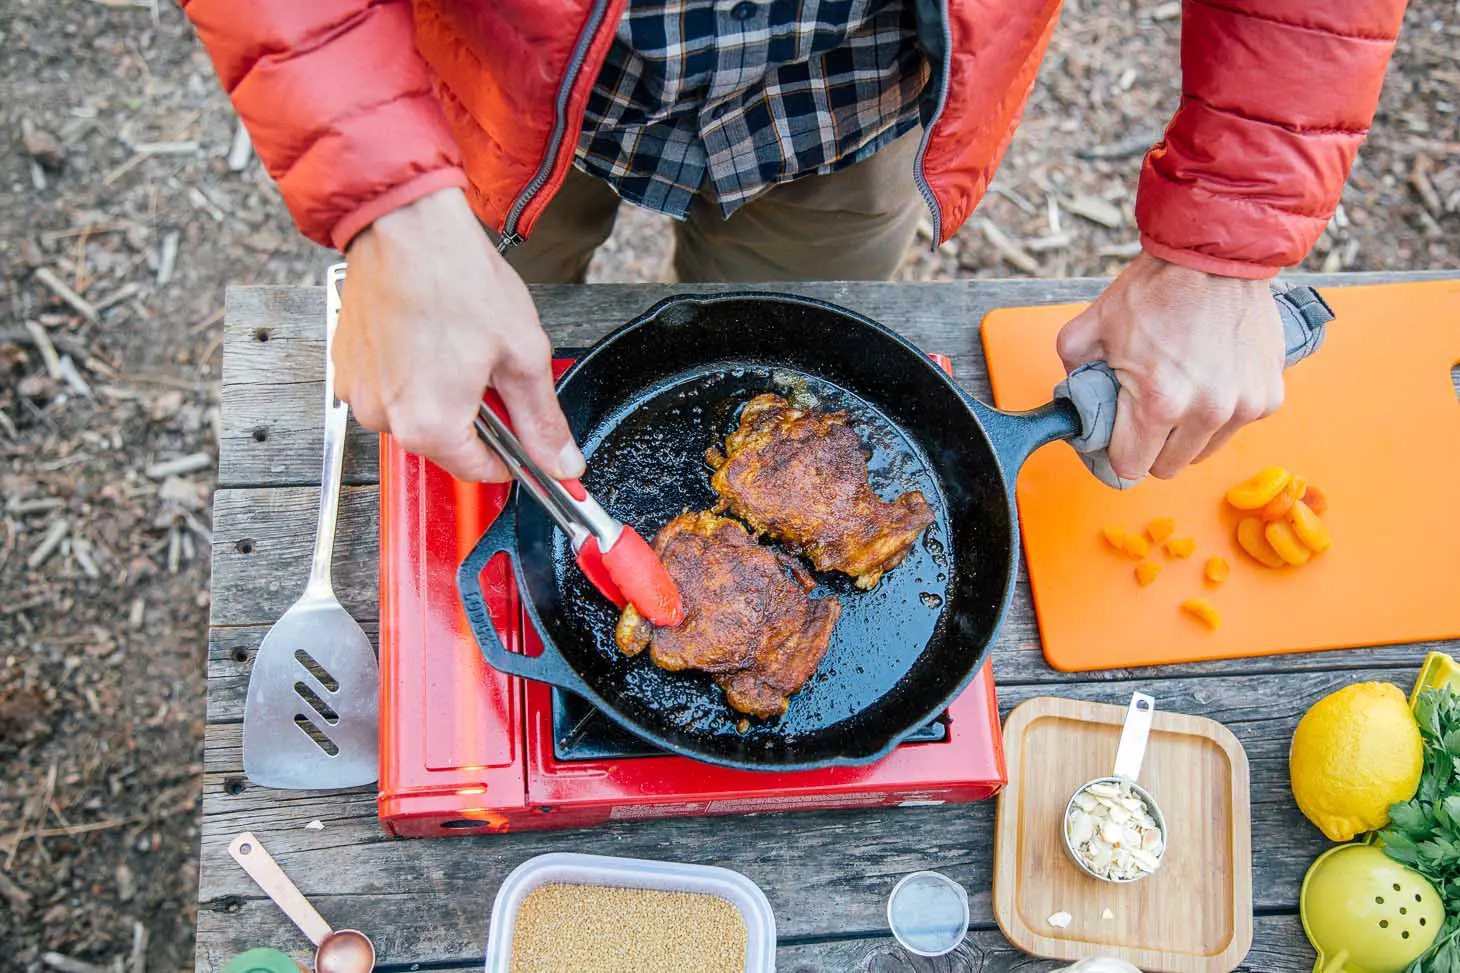 Michael cooking chicken in a cast-iron skillet over a camp stove